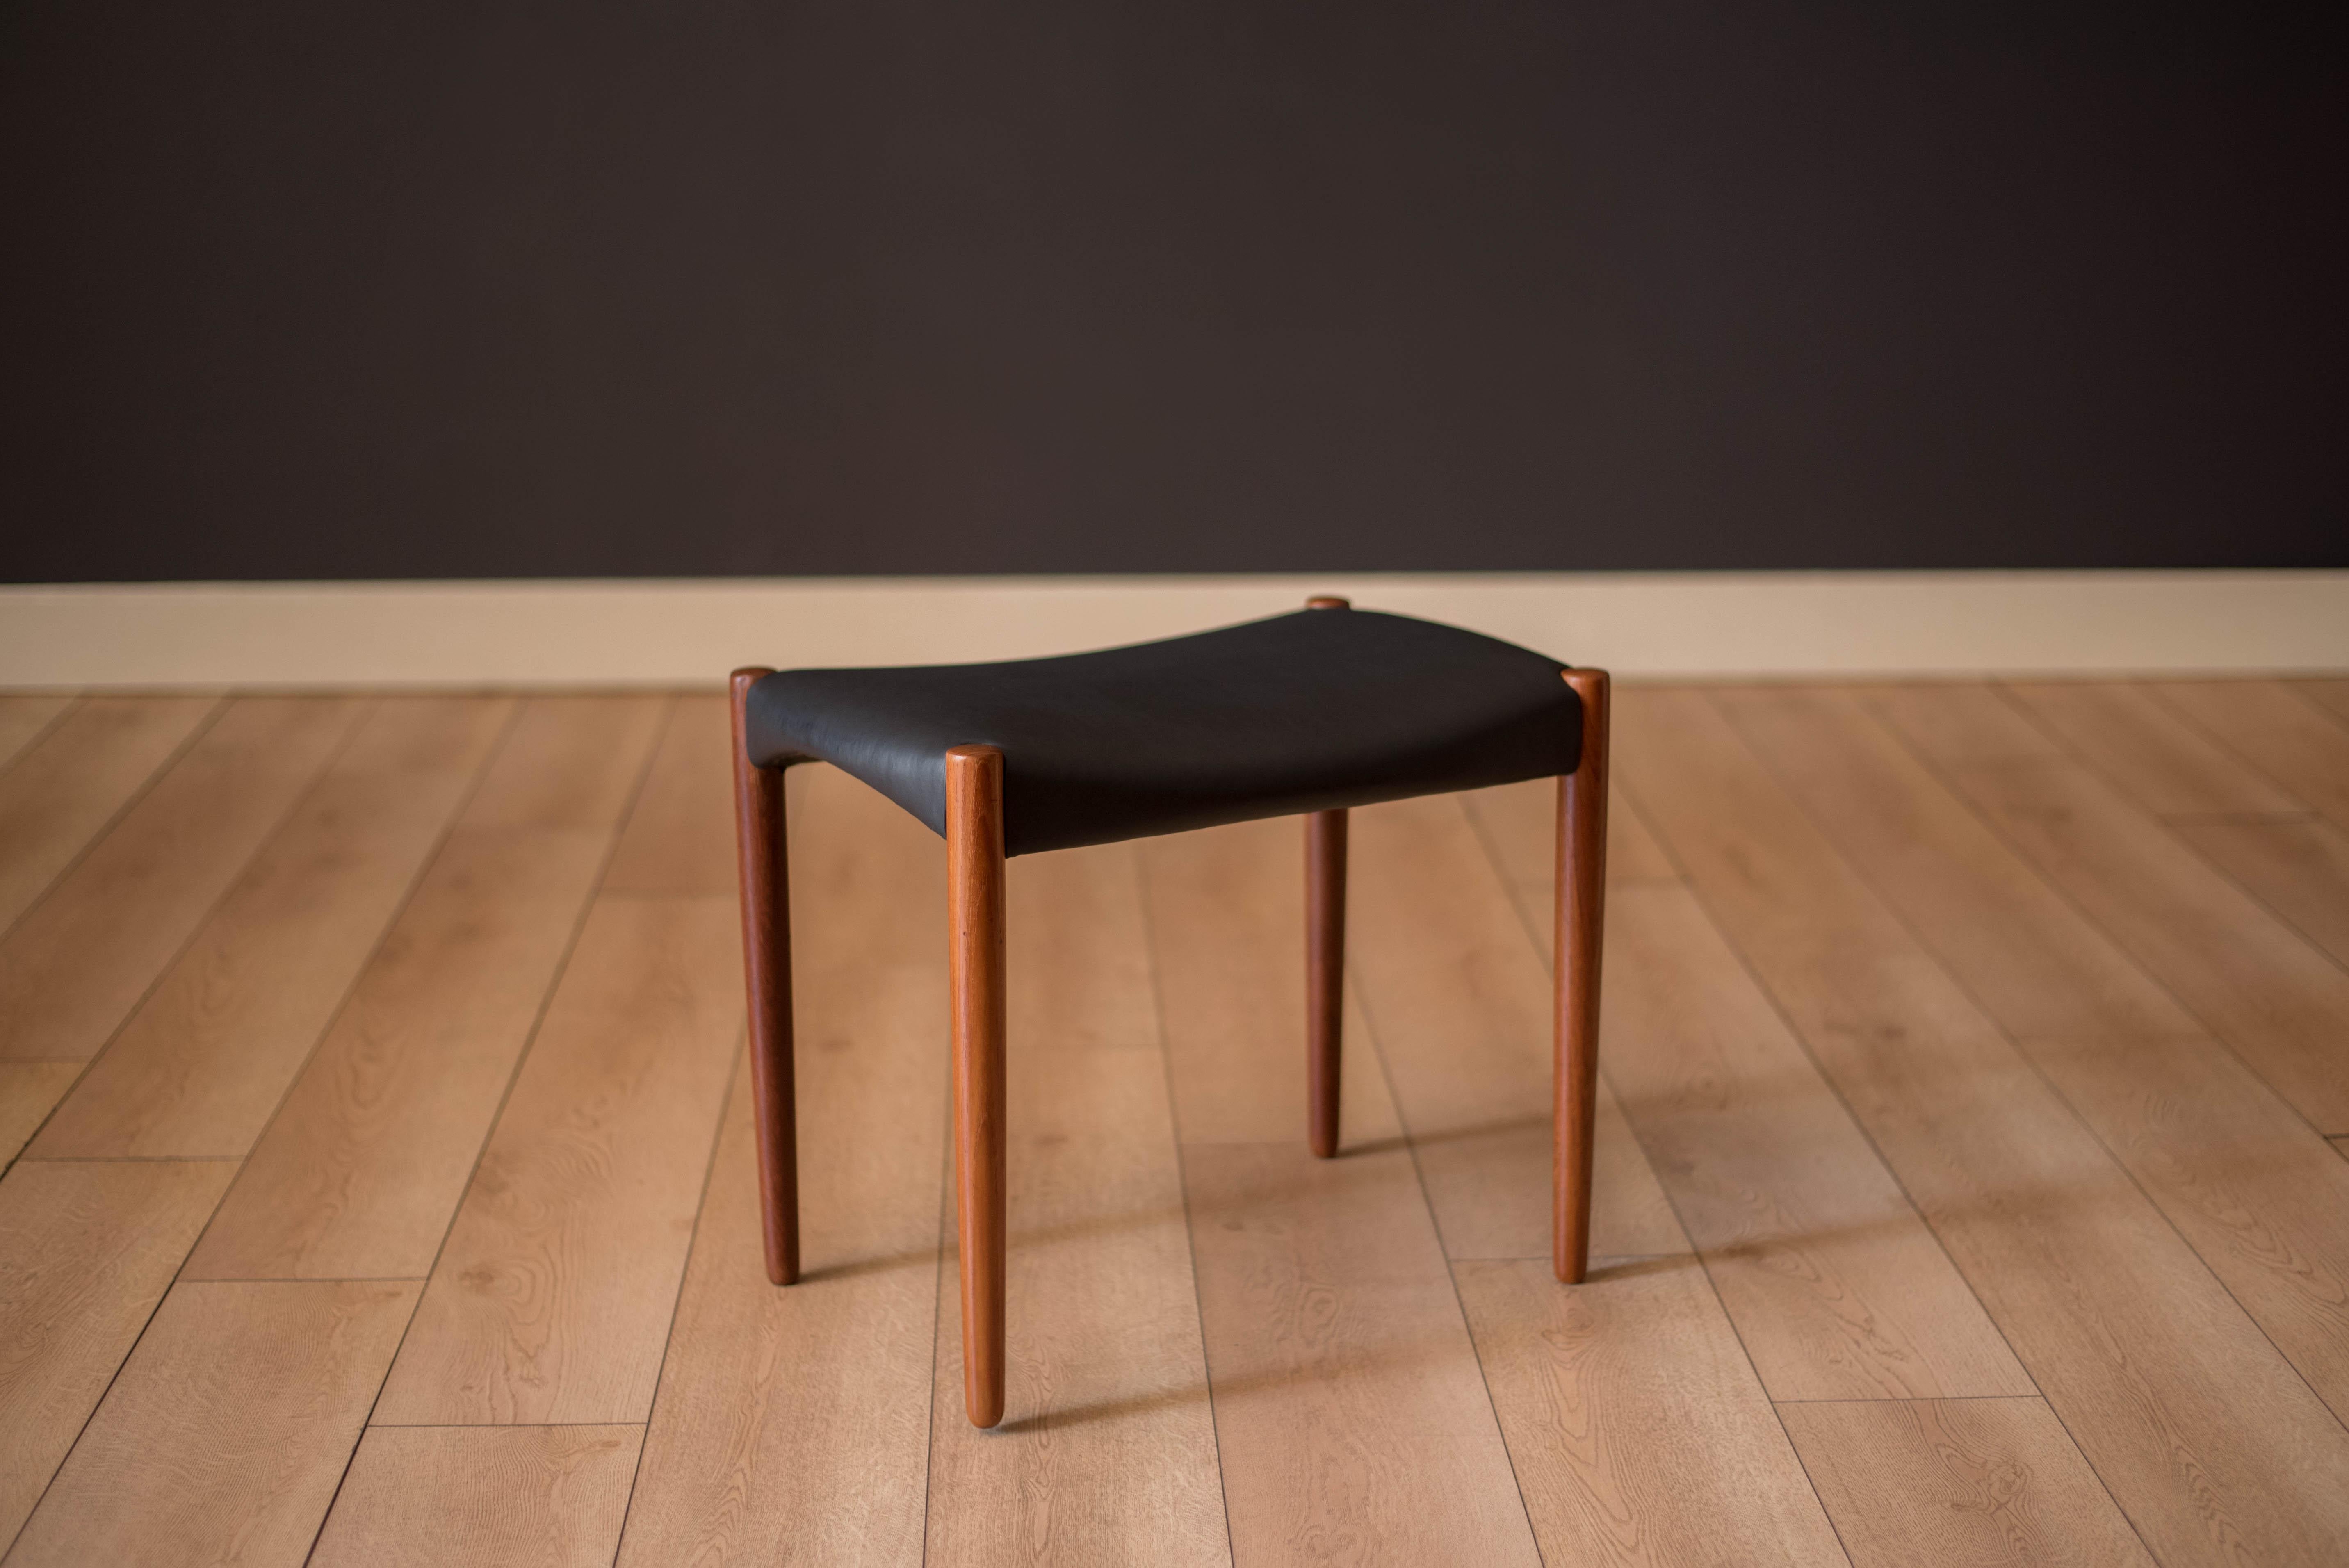 Mid-Century Modern stool in teak by Aksel Bender Madsen and Ejner Larsen for cabinet maker Willy Beck, Denmark. Features a sleek minimalist design and has been newly reupholstered in black leather. This versatile sitting stool can be used as a side